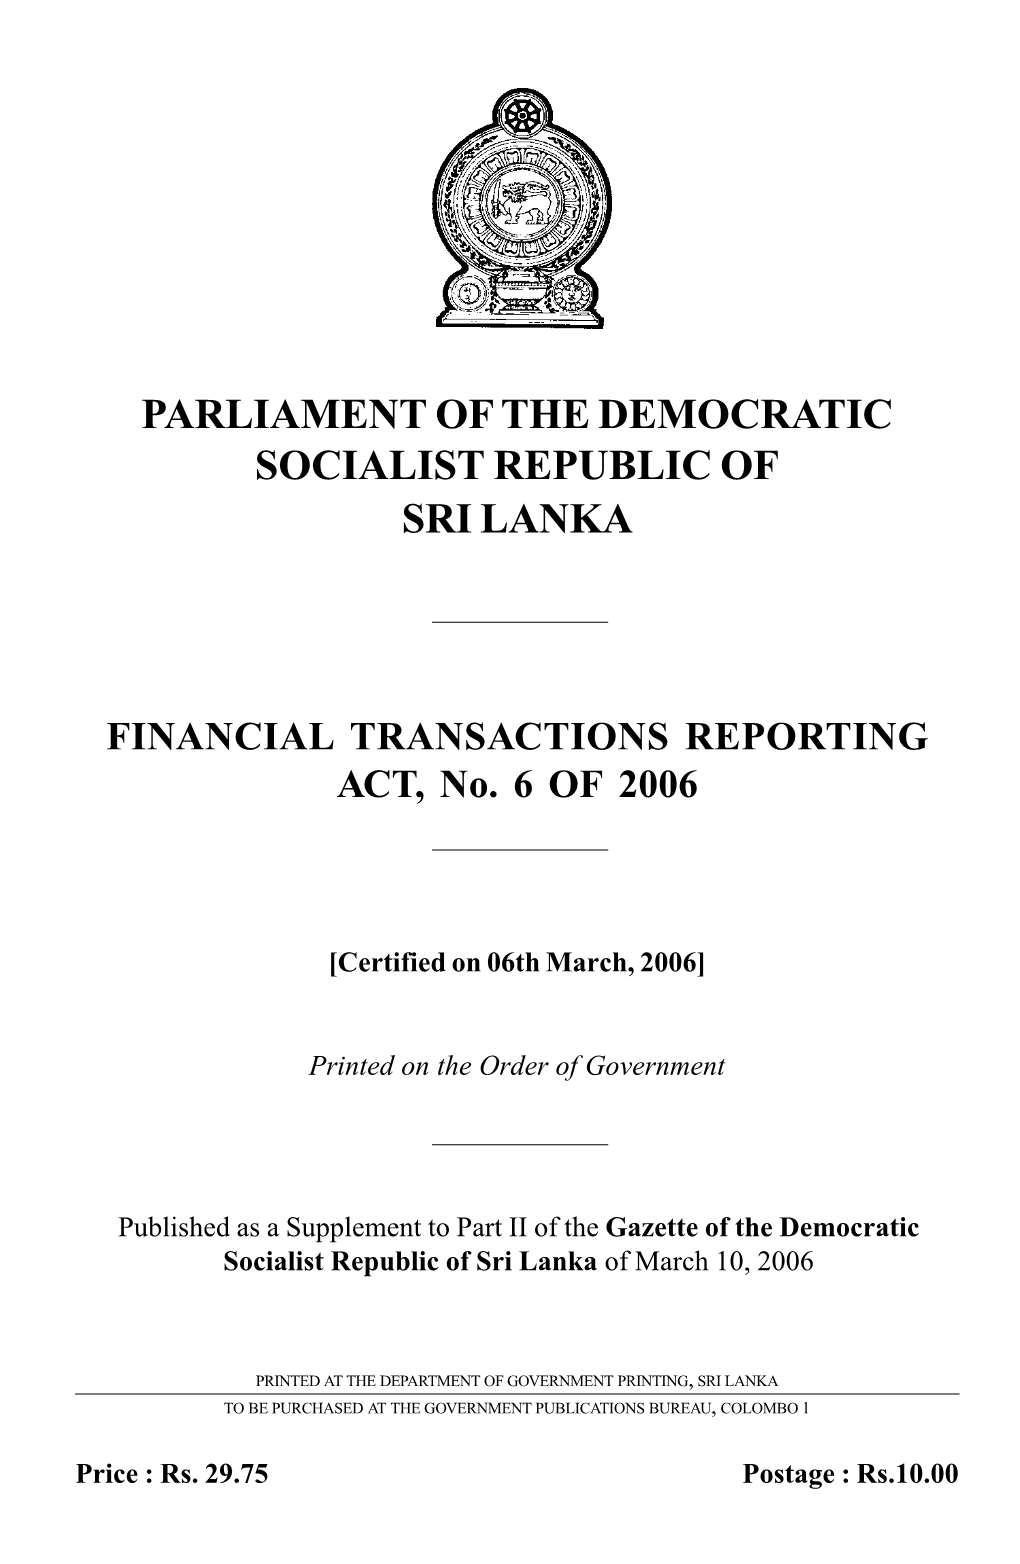 FINANCIAL TRANSACTIONS REPORTING ACT, No. 6 of 2006